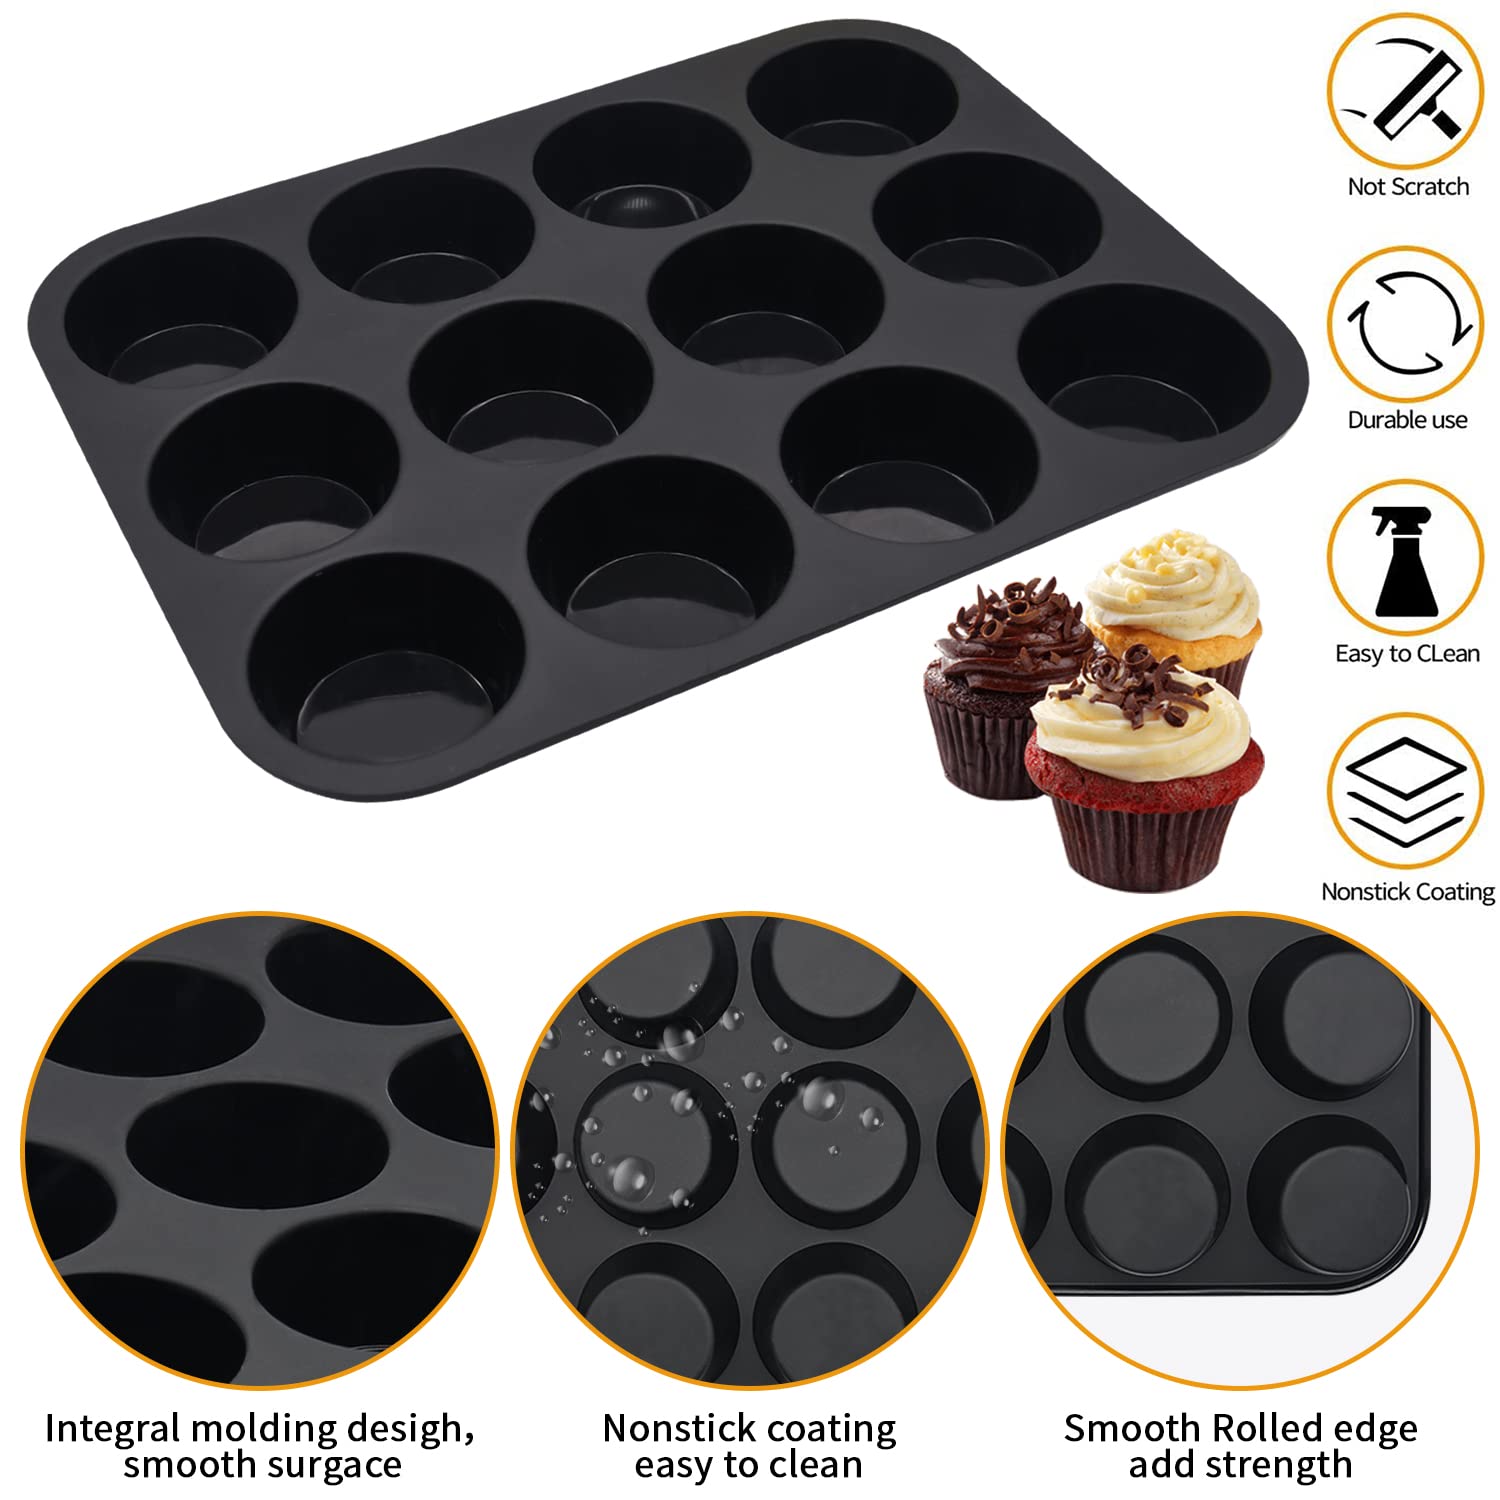 Bongpuda Silicone Muffin Pans Nonstick 12, Egg Bite Mold 2 Packs with Silicone Oil Brush - Cupcake Pan 12 Regular Size | Silicone Baking Sheet Brownie Trays for Oven, Bakeware, Cookies